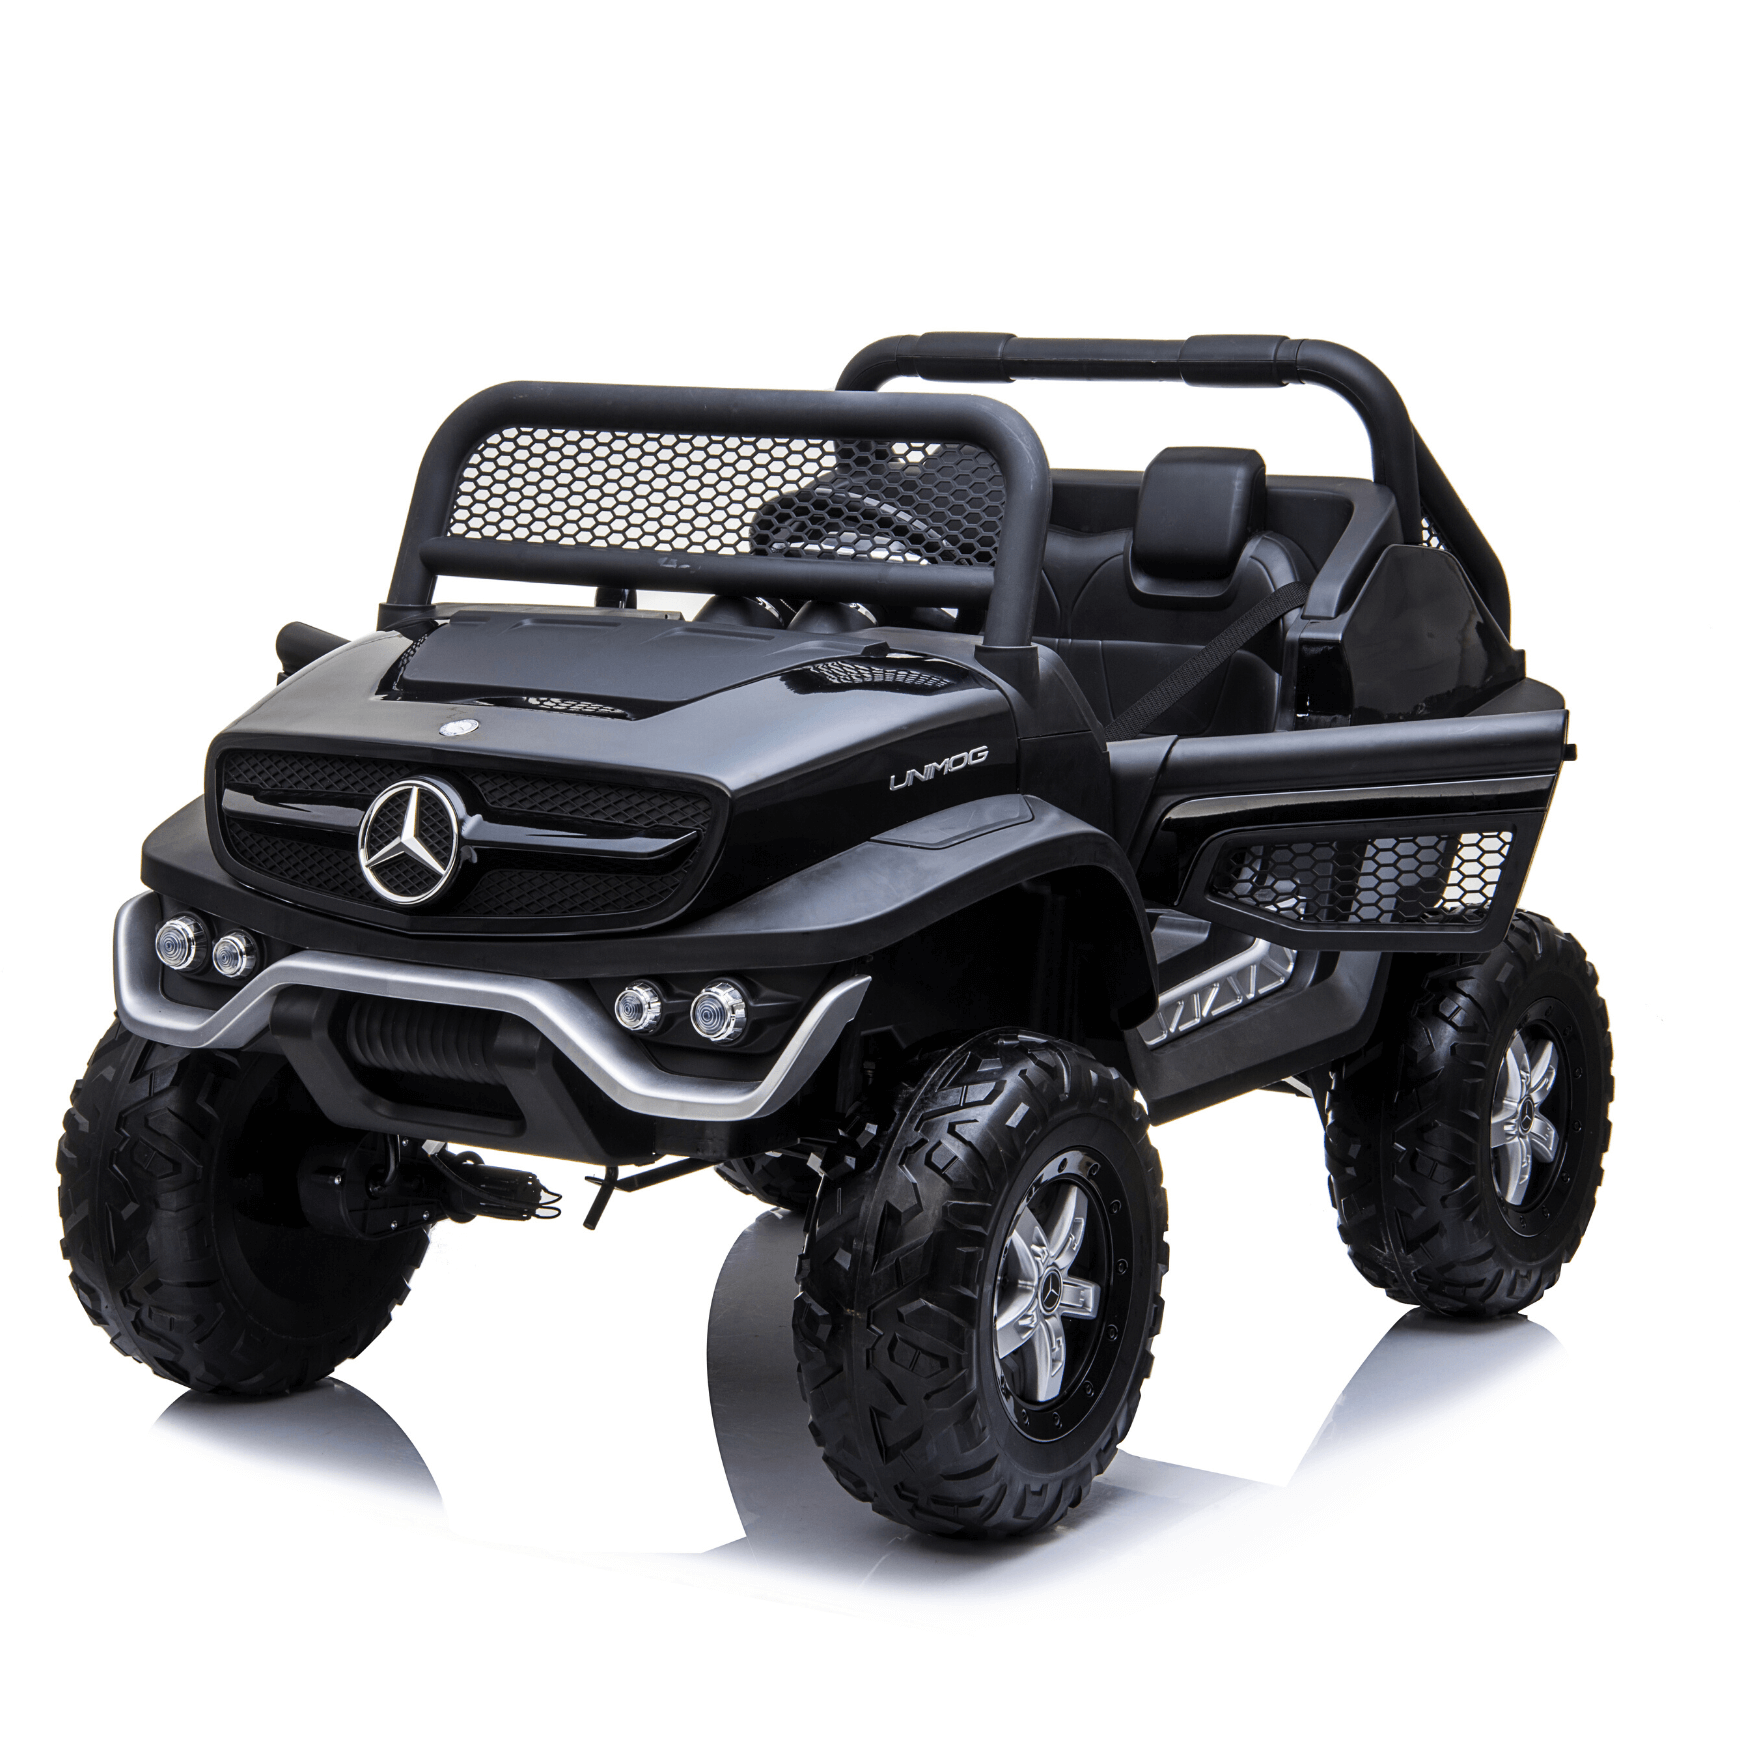 Licensed 12 v Mercedes Raider Wagon Ride on Red and Black Electric Jeep Car for kids with 2 seats 4wd